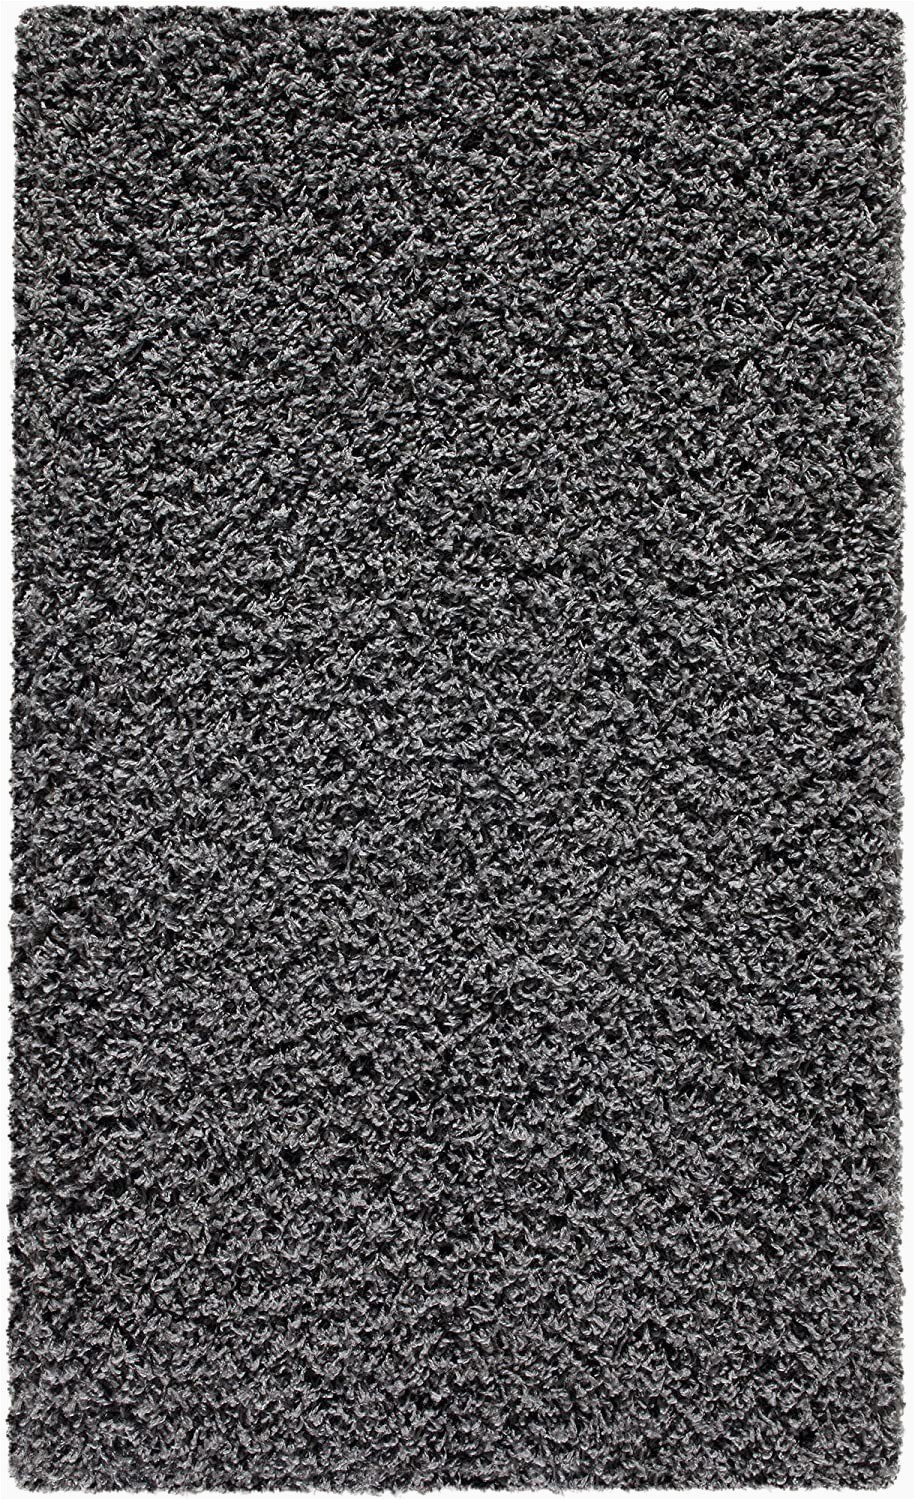 Mainstays Polyester solid Textured Shag area Rug and Runner Collection Amazon Mainstays Polyester Shag area Rugs or Runner 1